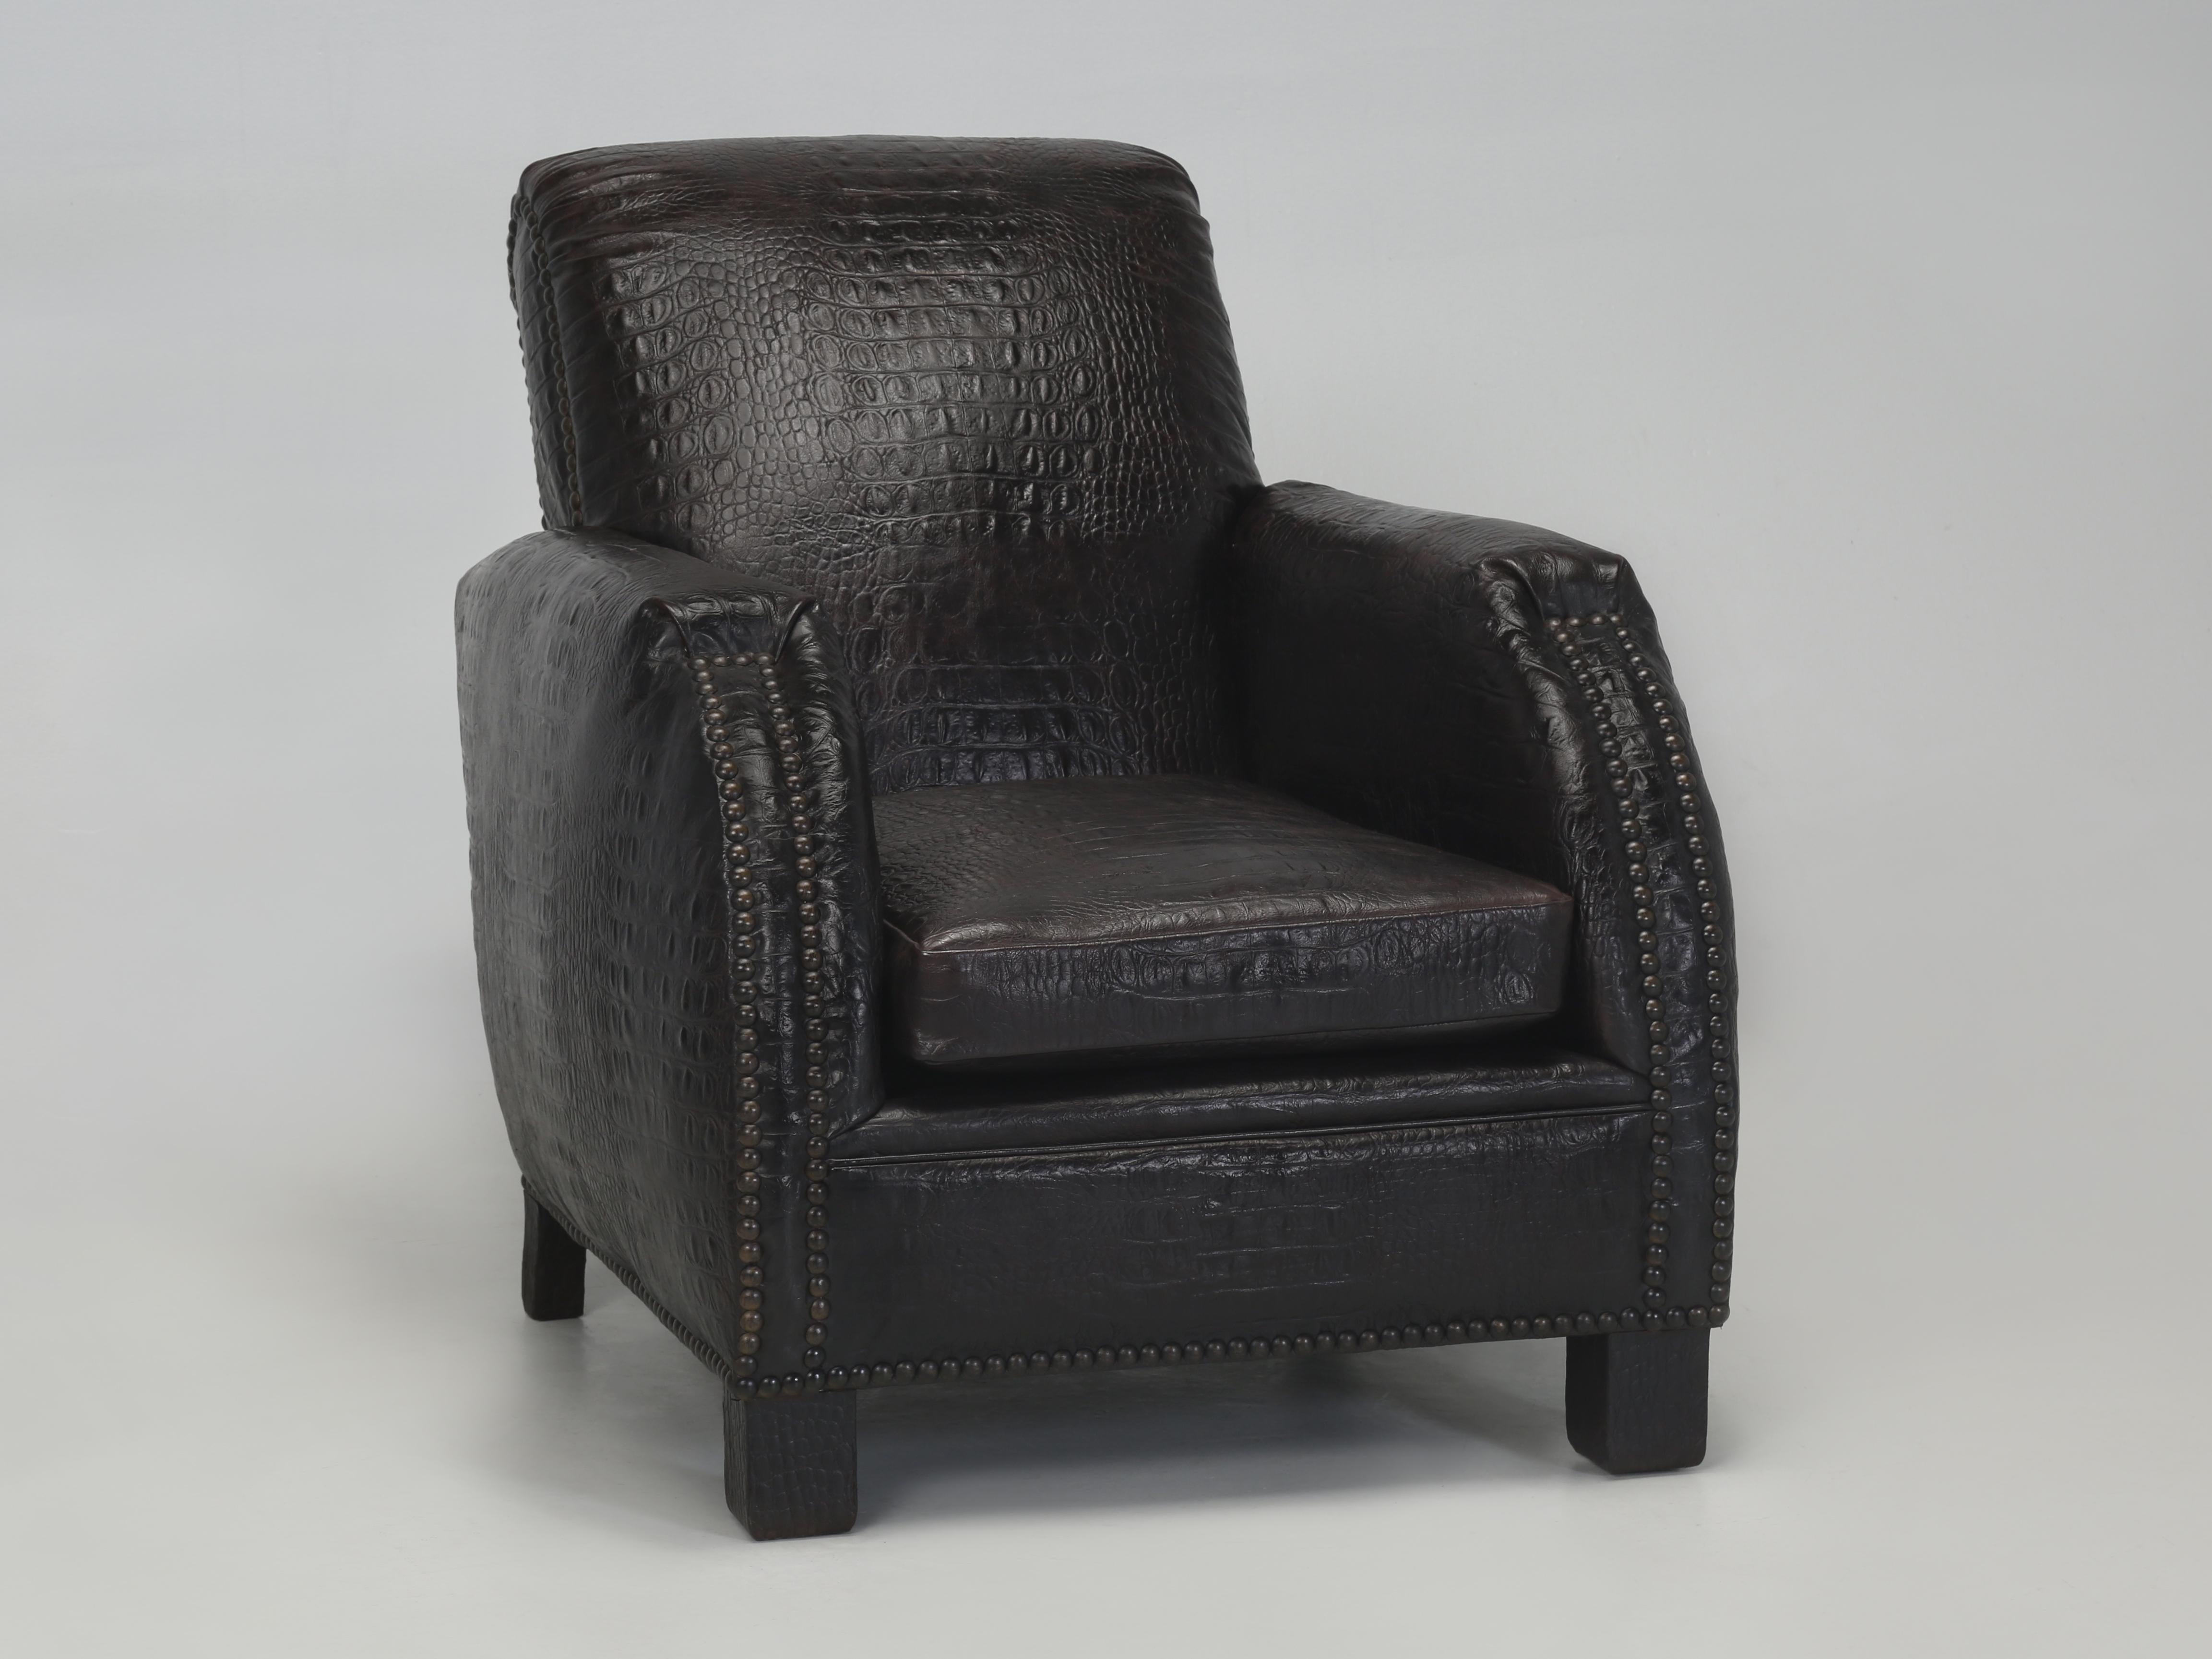 Pair of French Art Deco Leather Club Chairs covered in a Faux Crocodile 